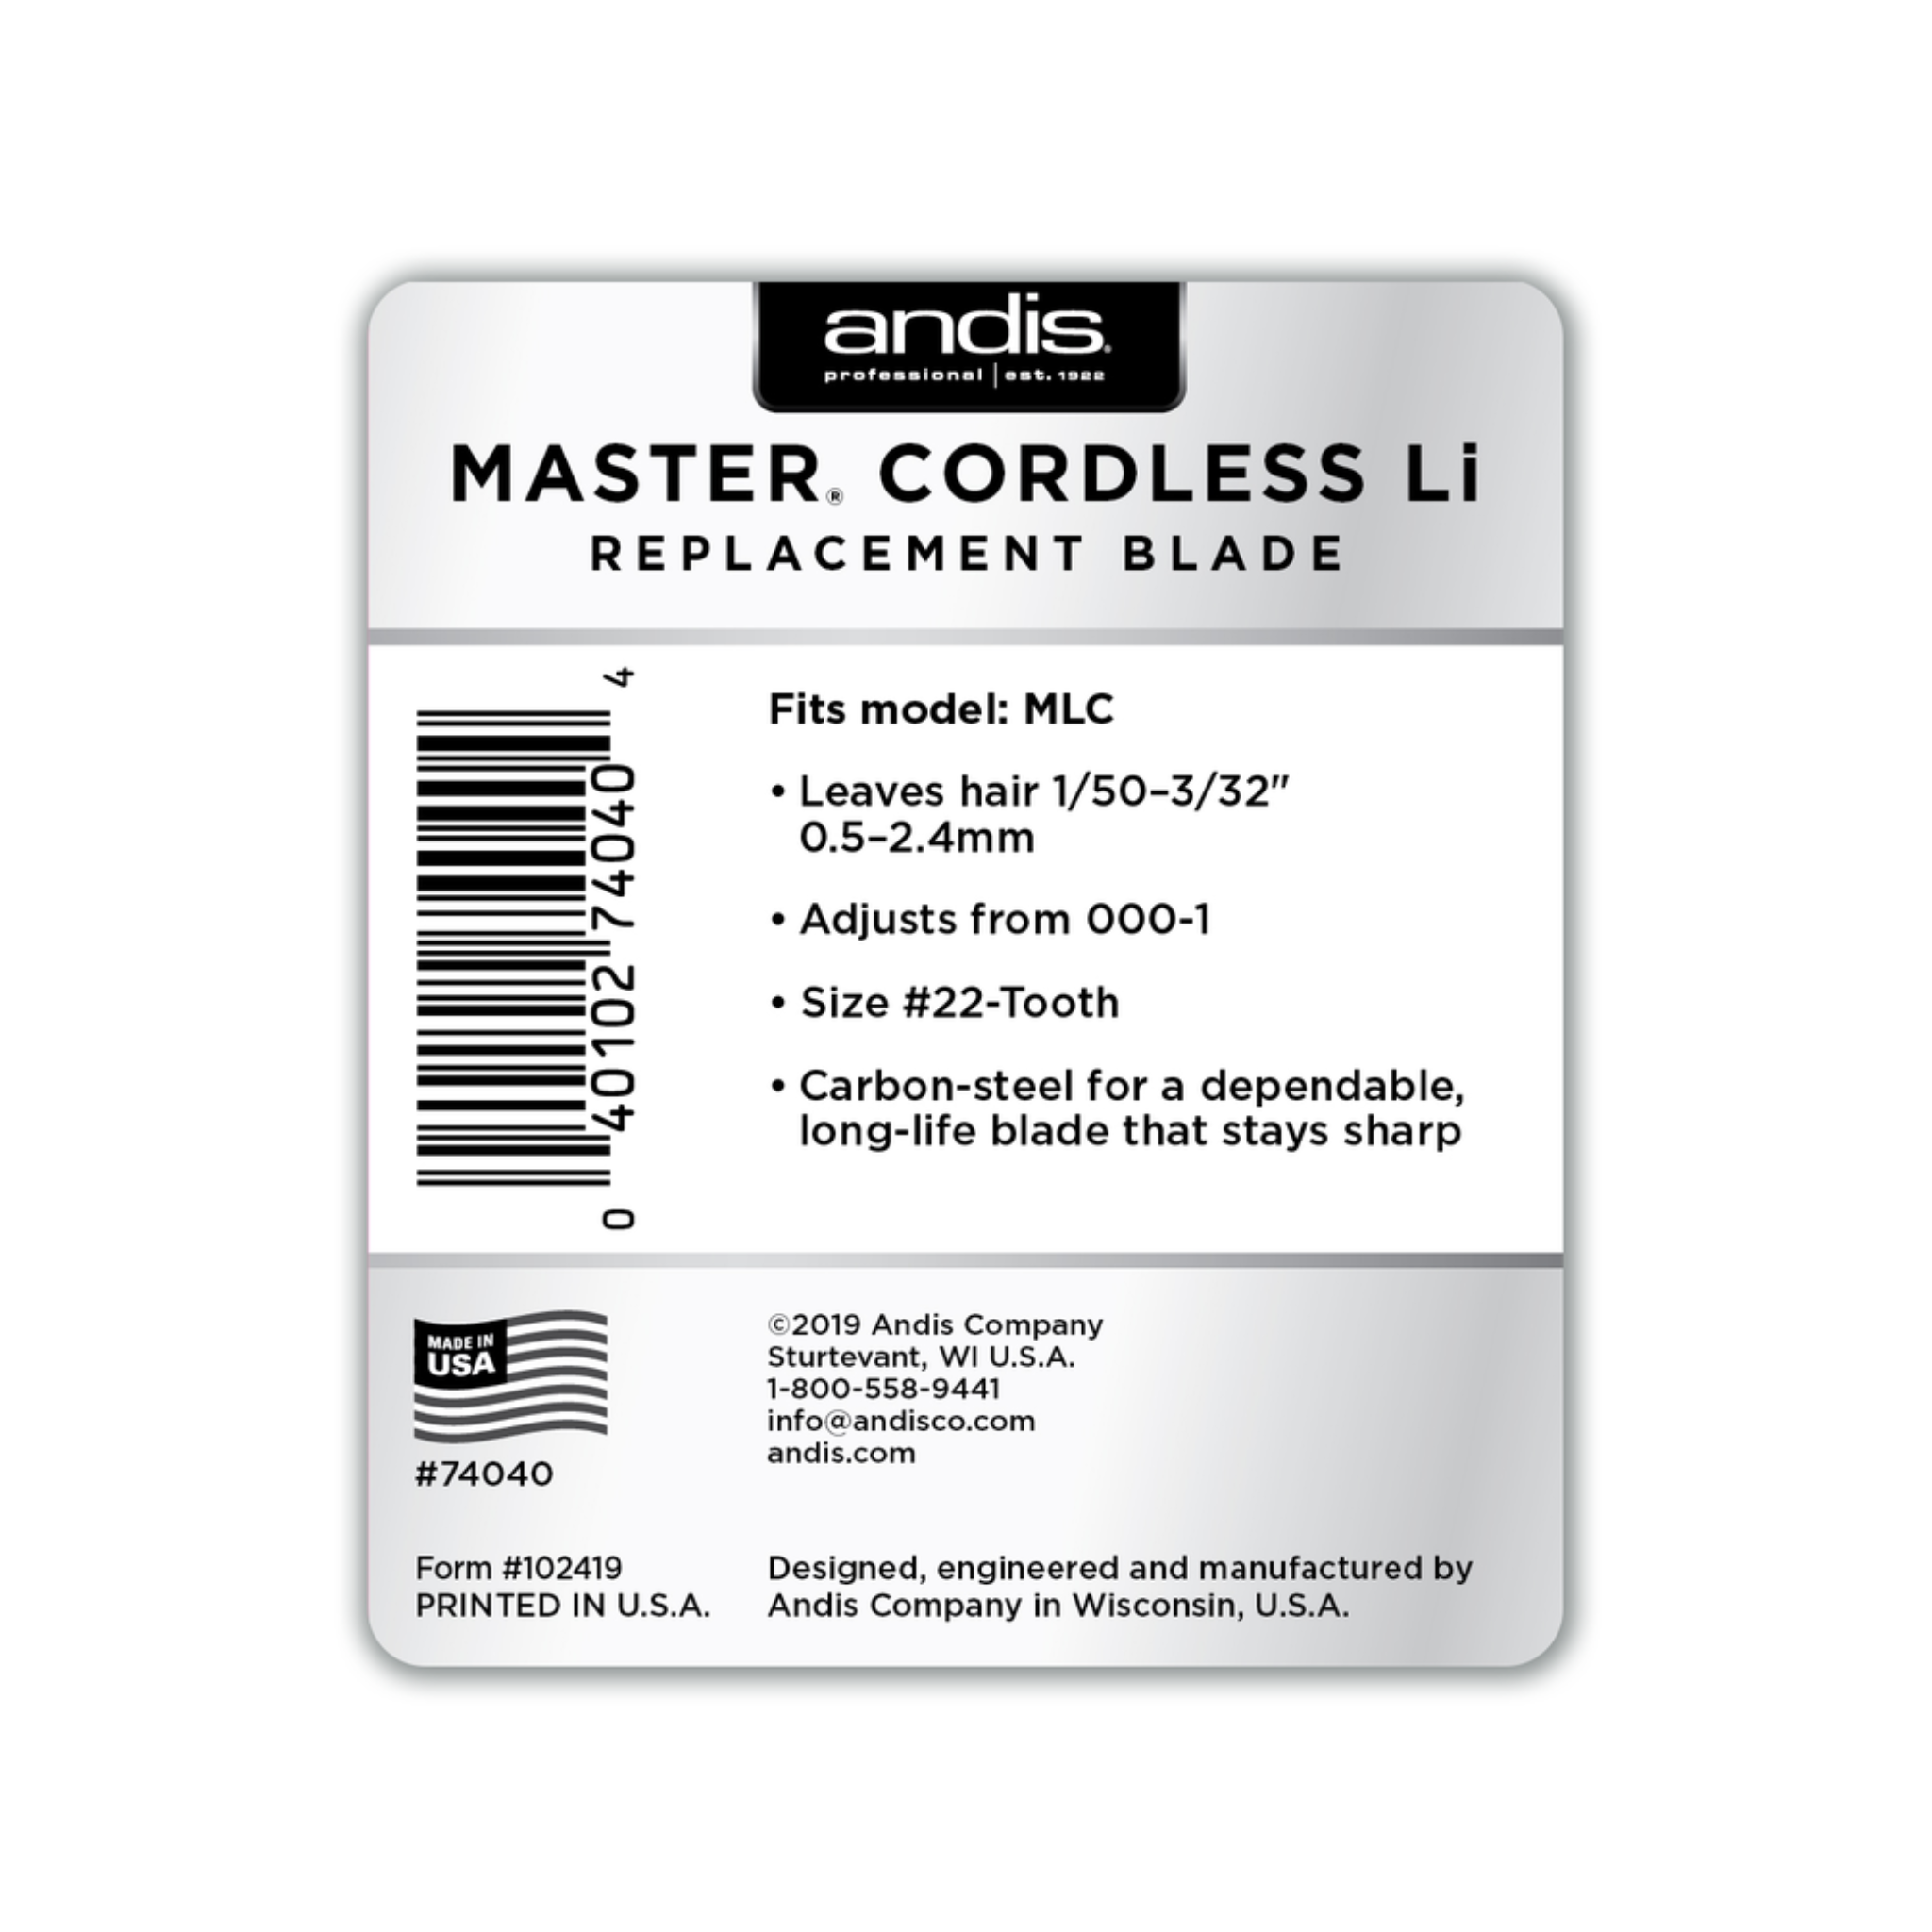 Master Cordless - Replacement Blade (Size 000-1)